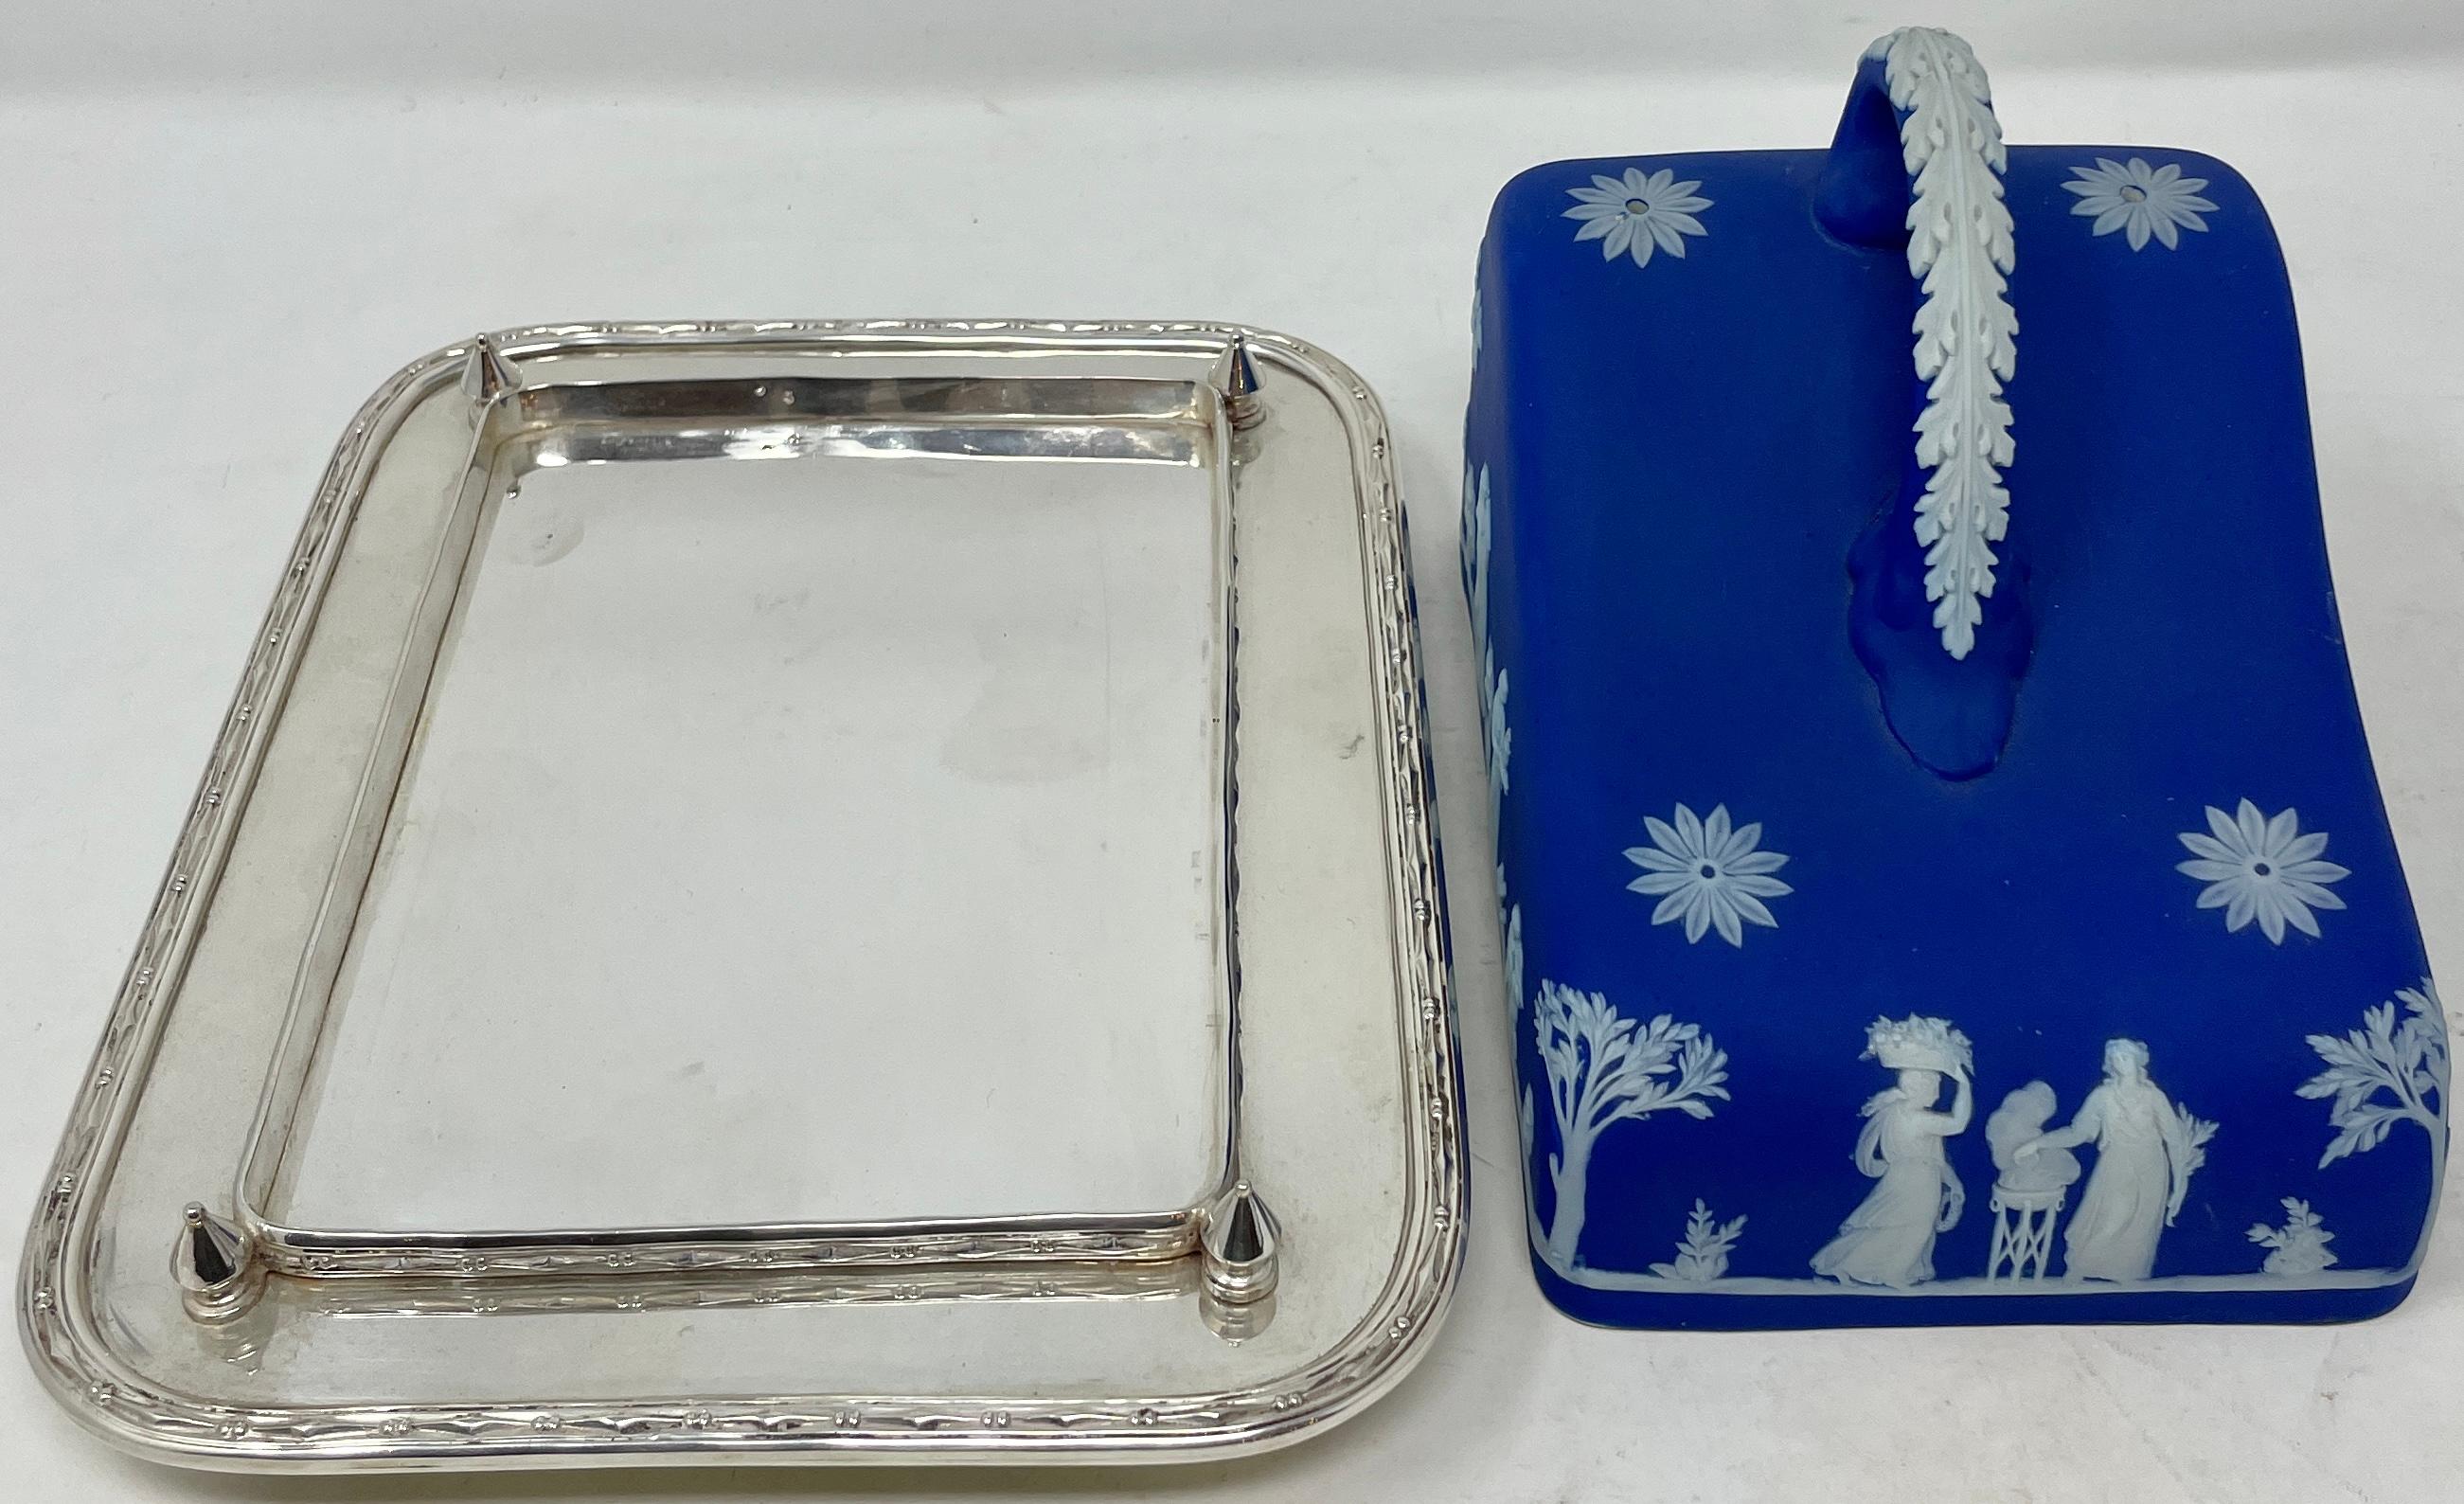 Antique English Wedgwood Porcelain & Silver Plated Cheese Dish, Circa 1890-1910 9